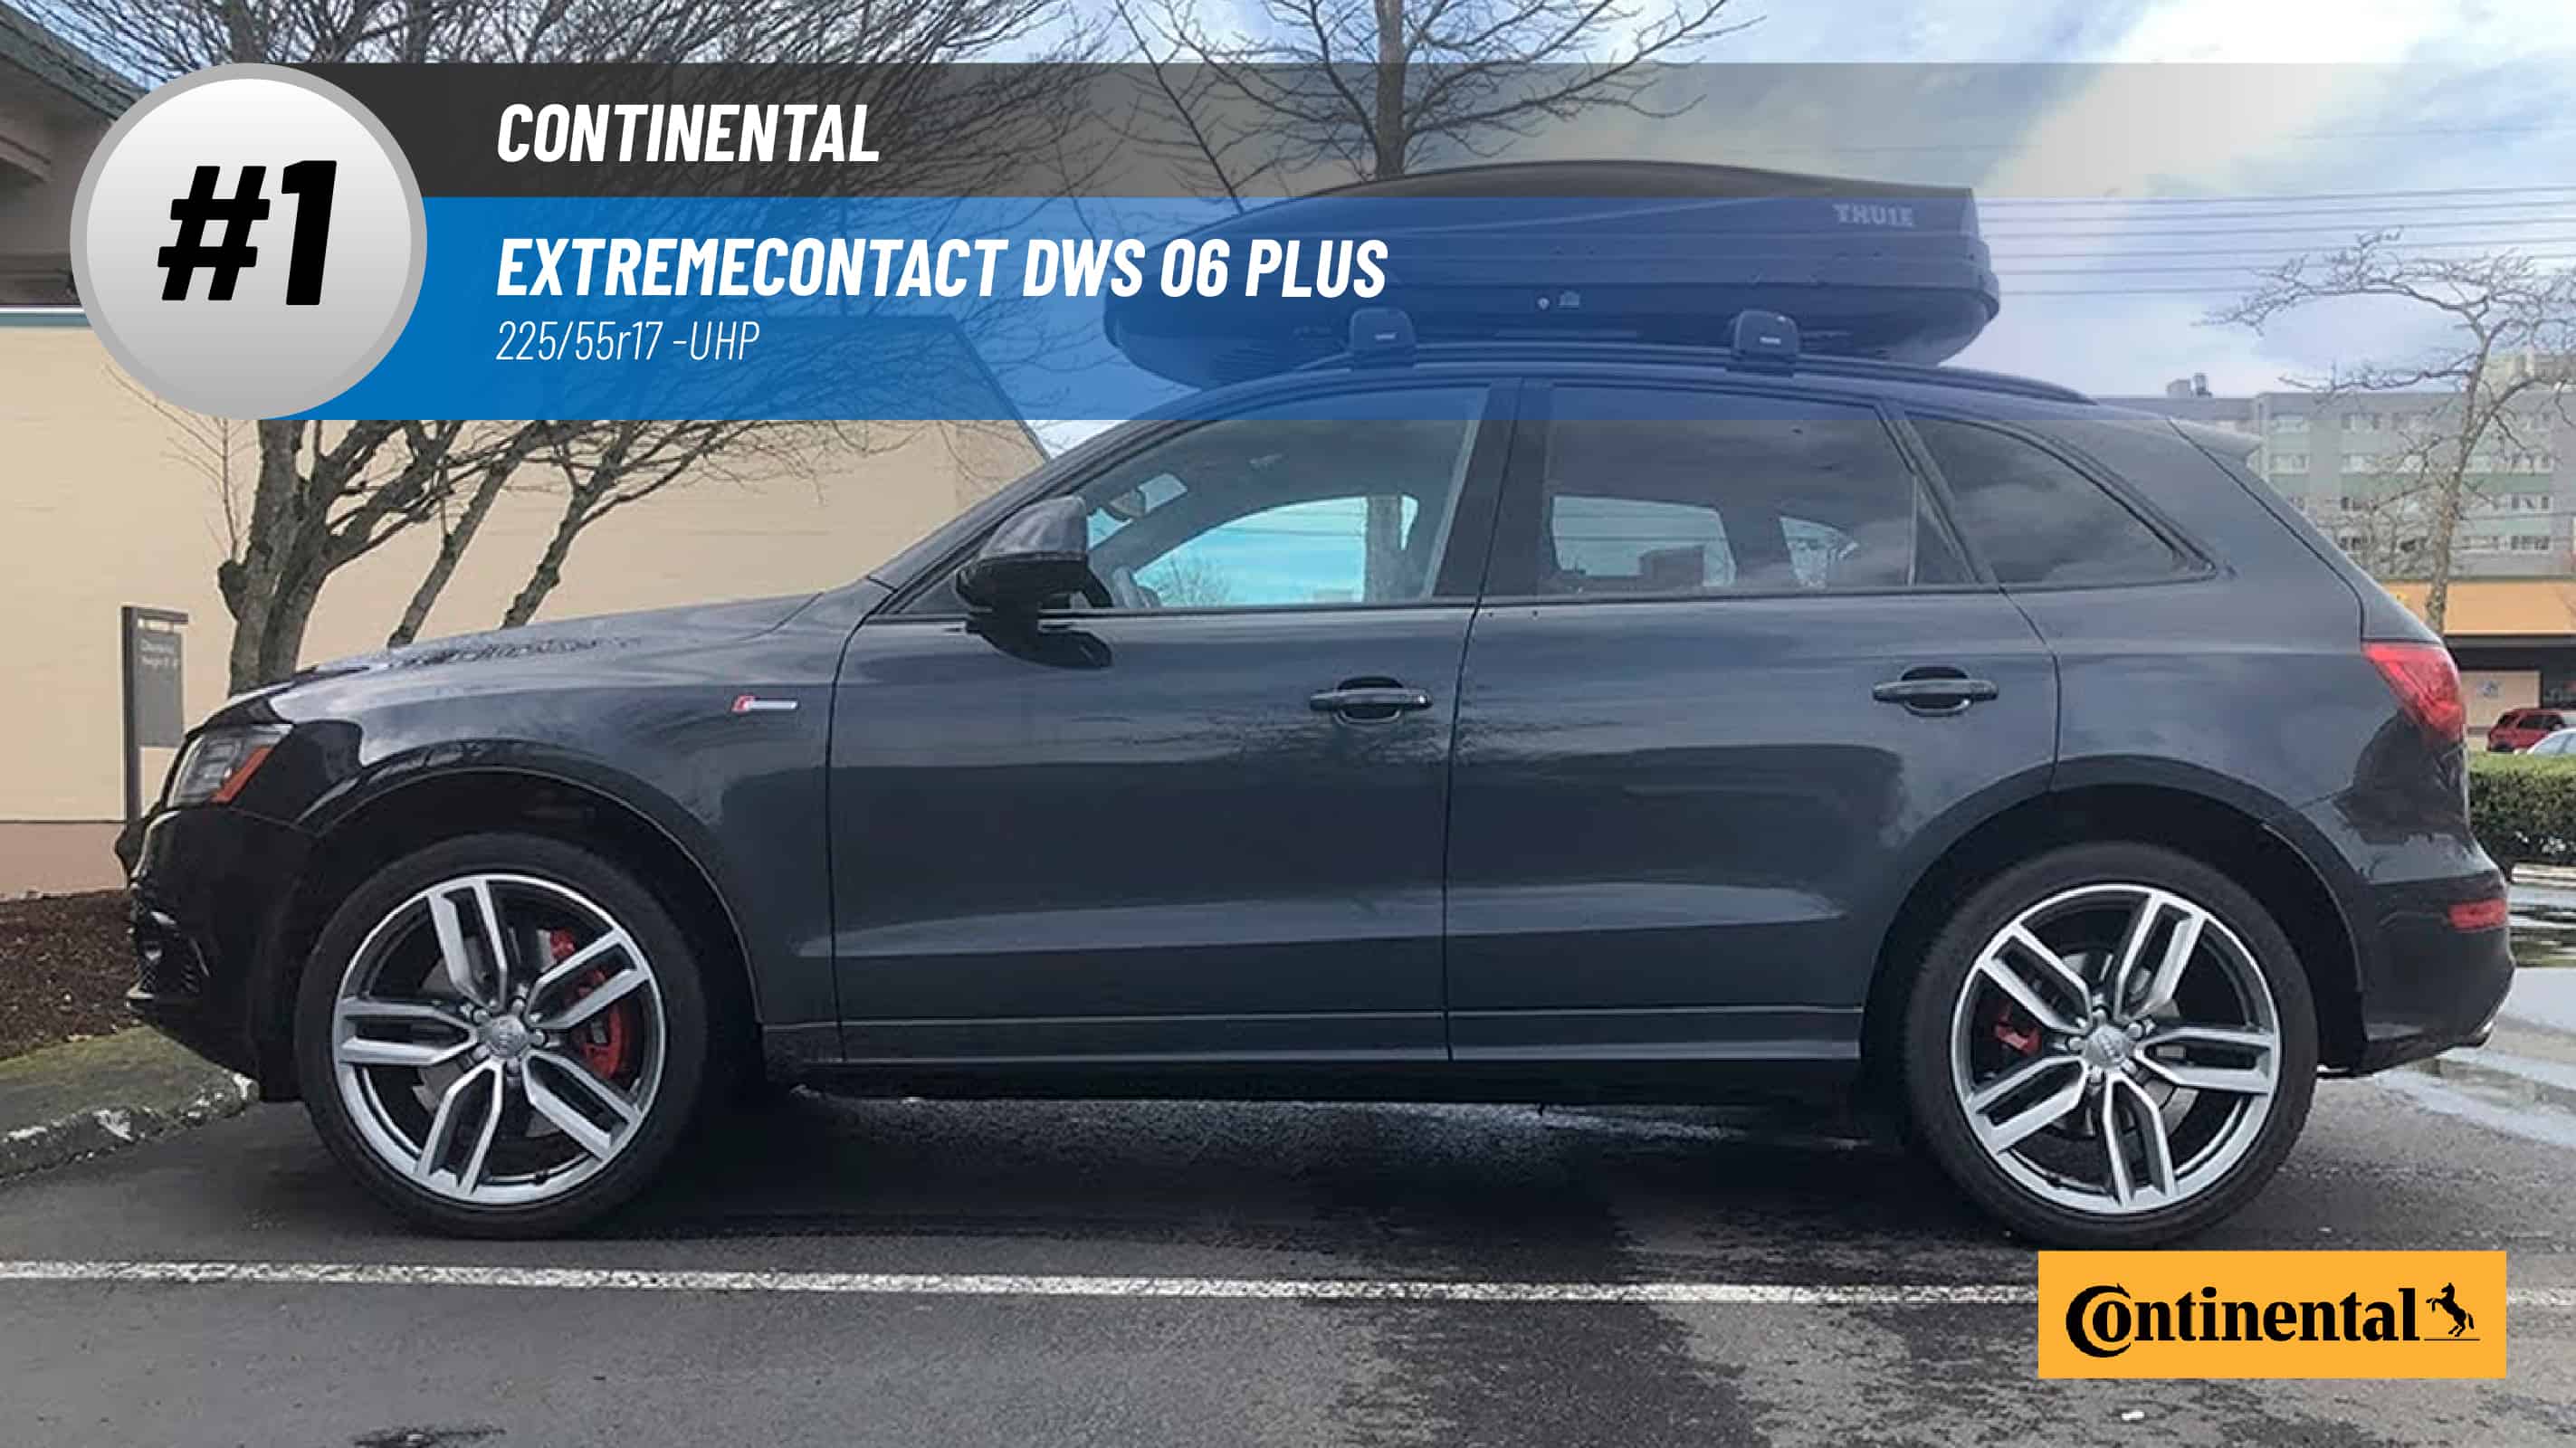 Top #1 UHP Tires: Continental ExtremeContact DWS 06 Plus – 225/55R17